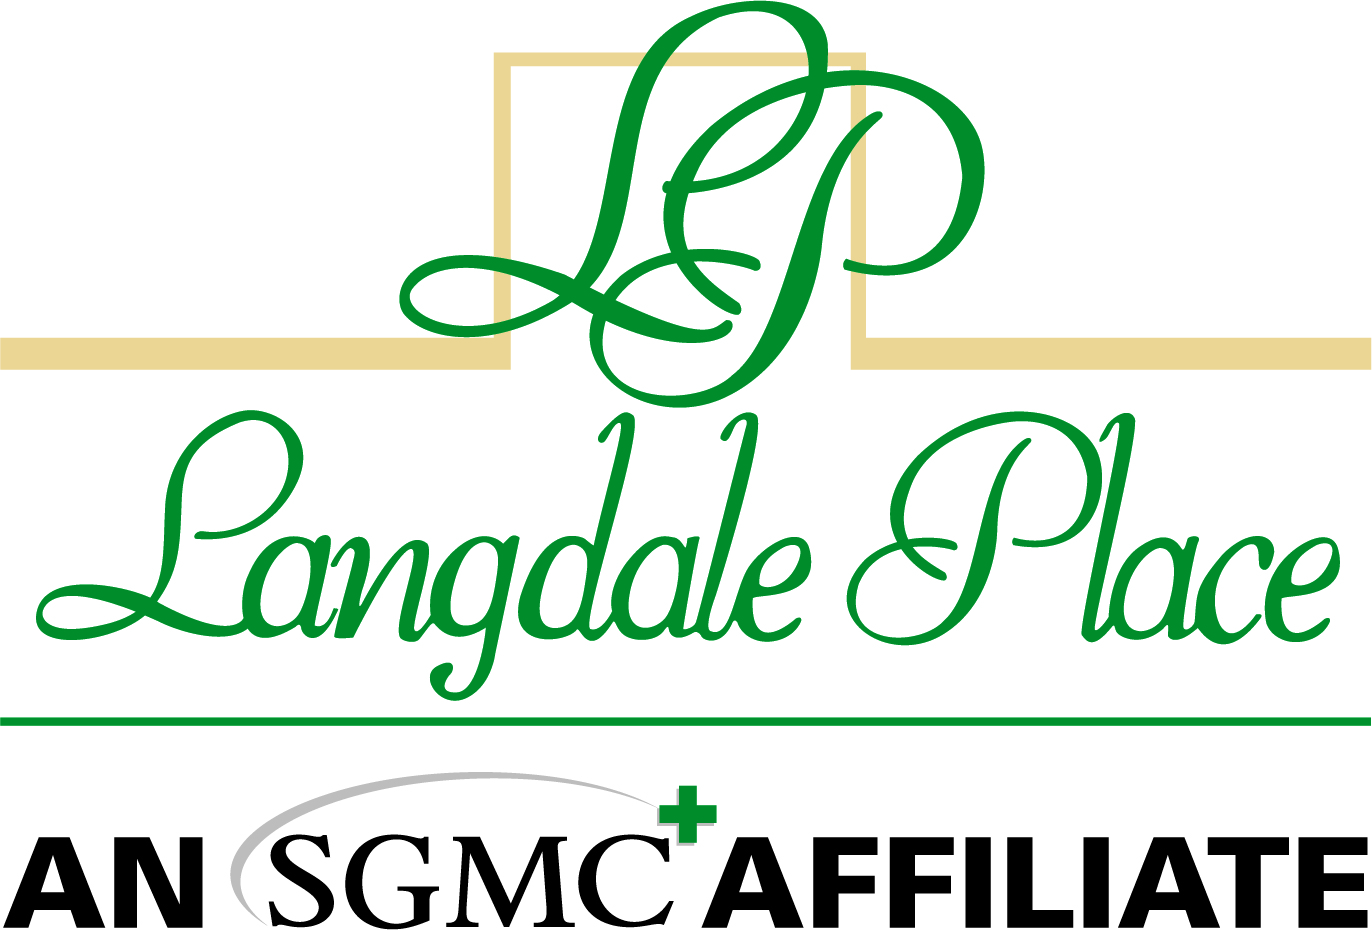 2. Langdale Place (Oro)